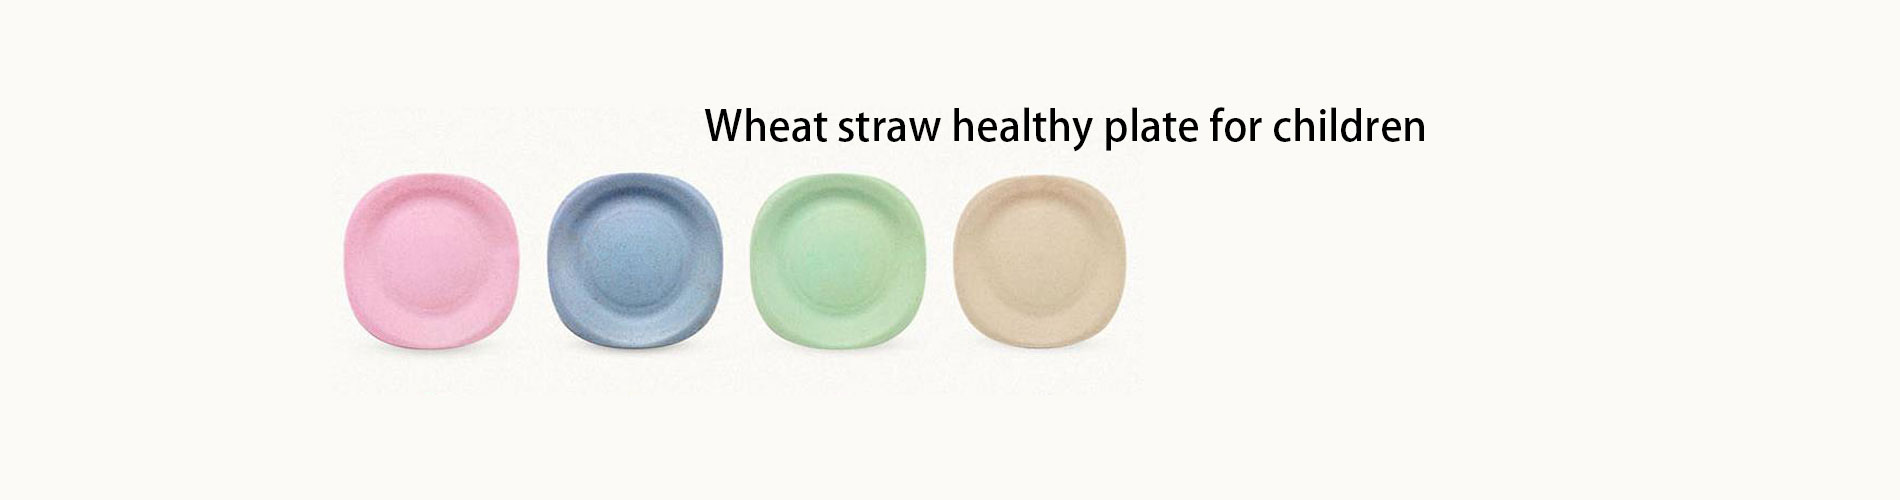 Wheat straw healthy plate for children